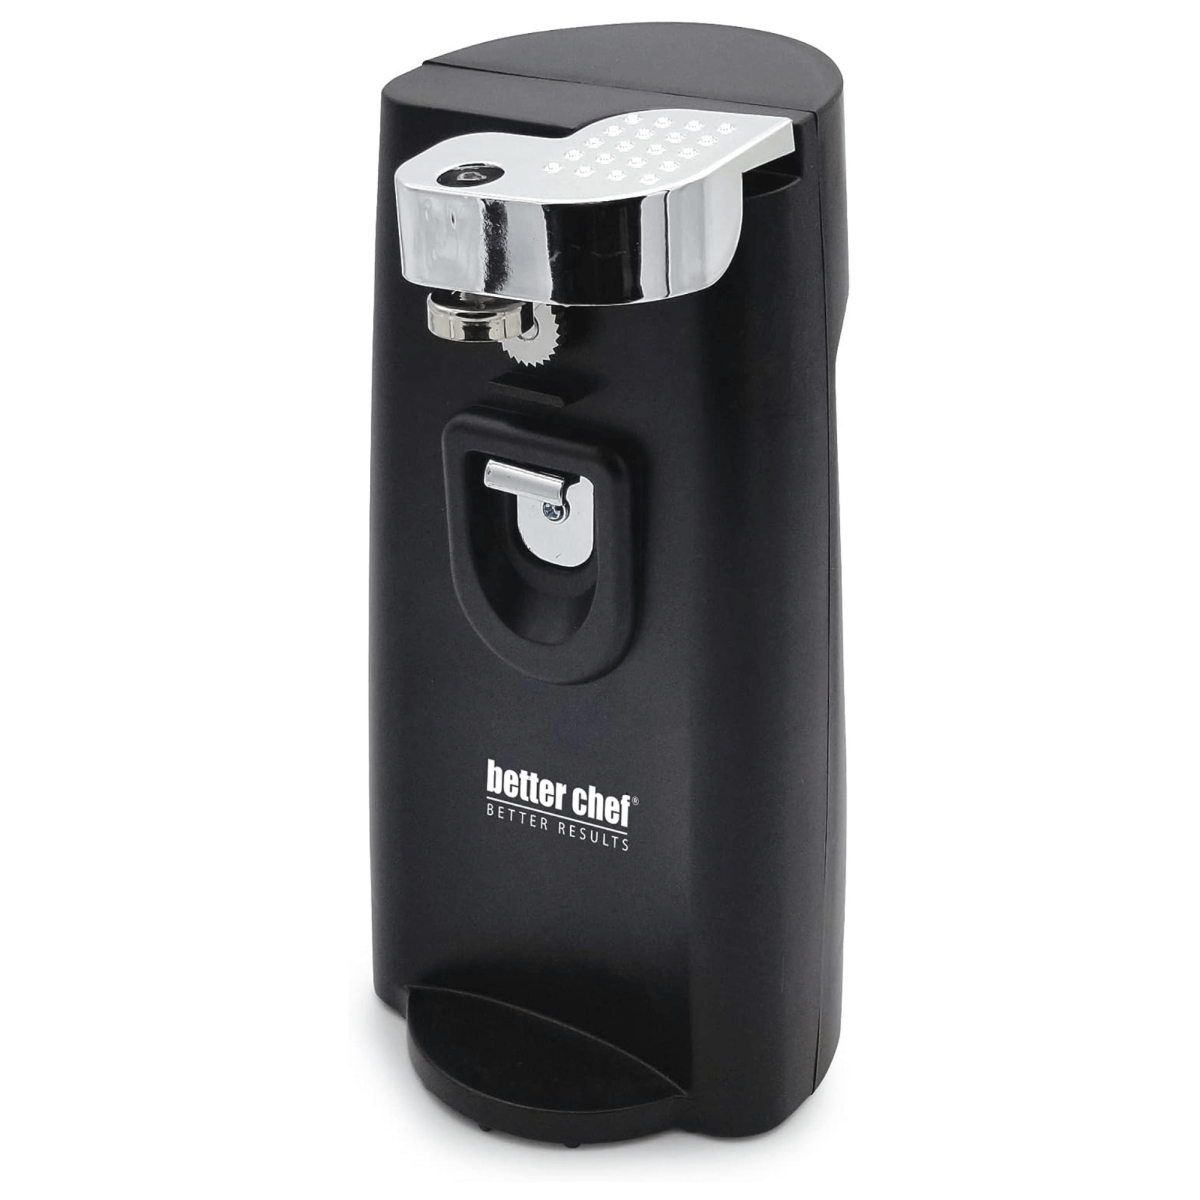 Picture of Better Chef IM-836B-CAN-CP Better Chef Deluxe Tall 3-in-1 Electric Can Opener - Black